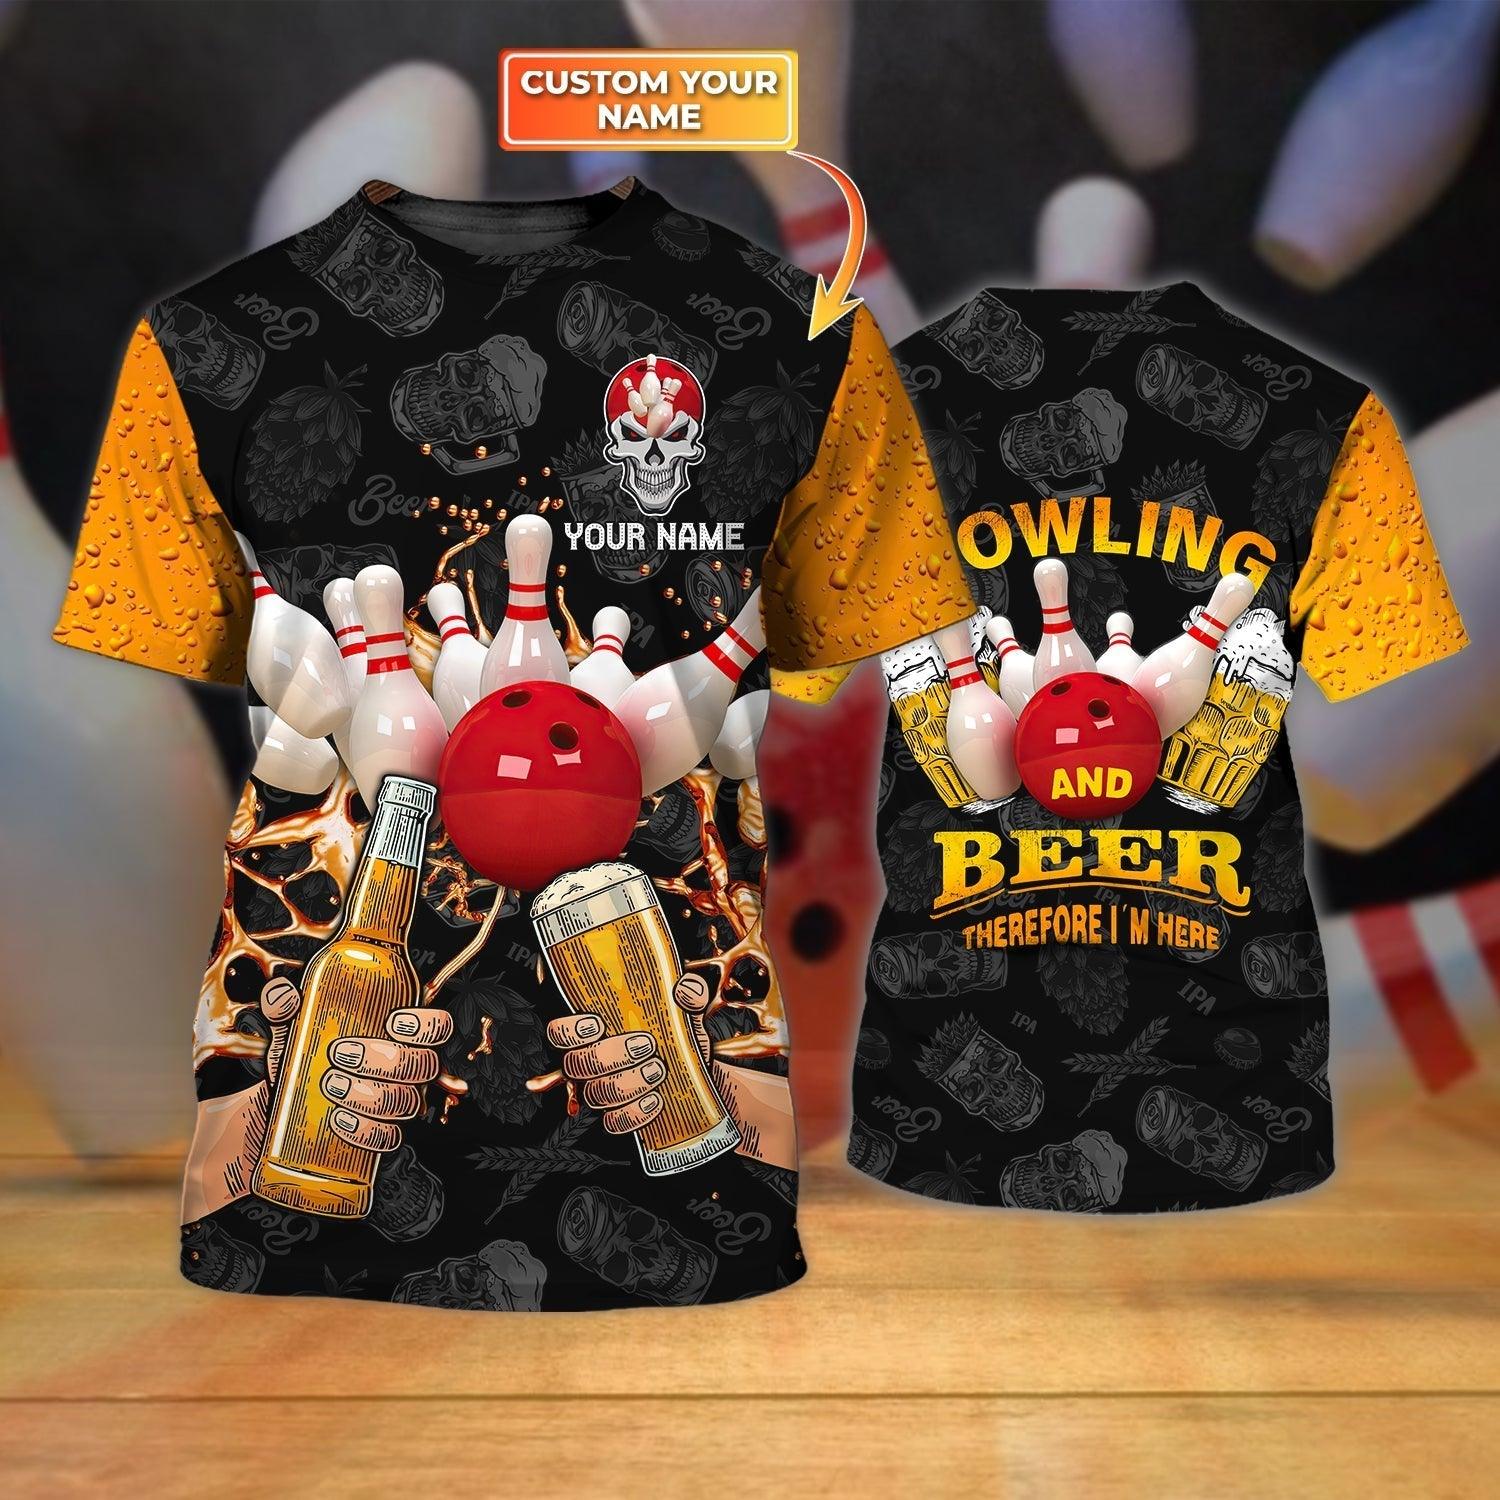 Customized Name Bowling T Shirt, Personalized 3D All Over Printed Bowling And Beer Shirts For Men And Women - Gift For Bowling Lover, Bowlers - Amzanimalsgift